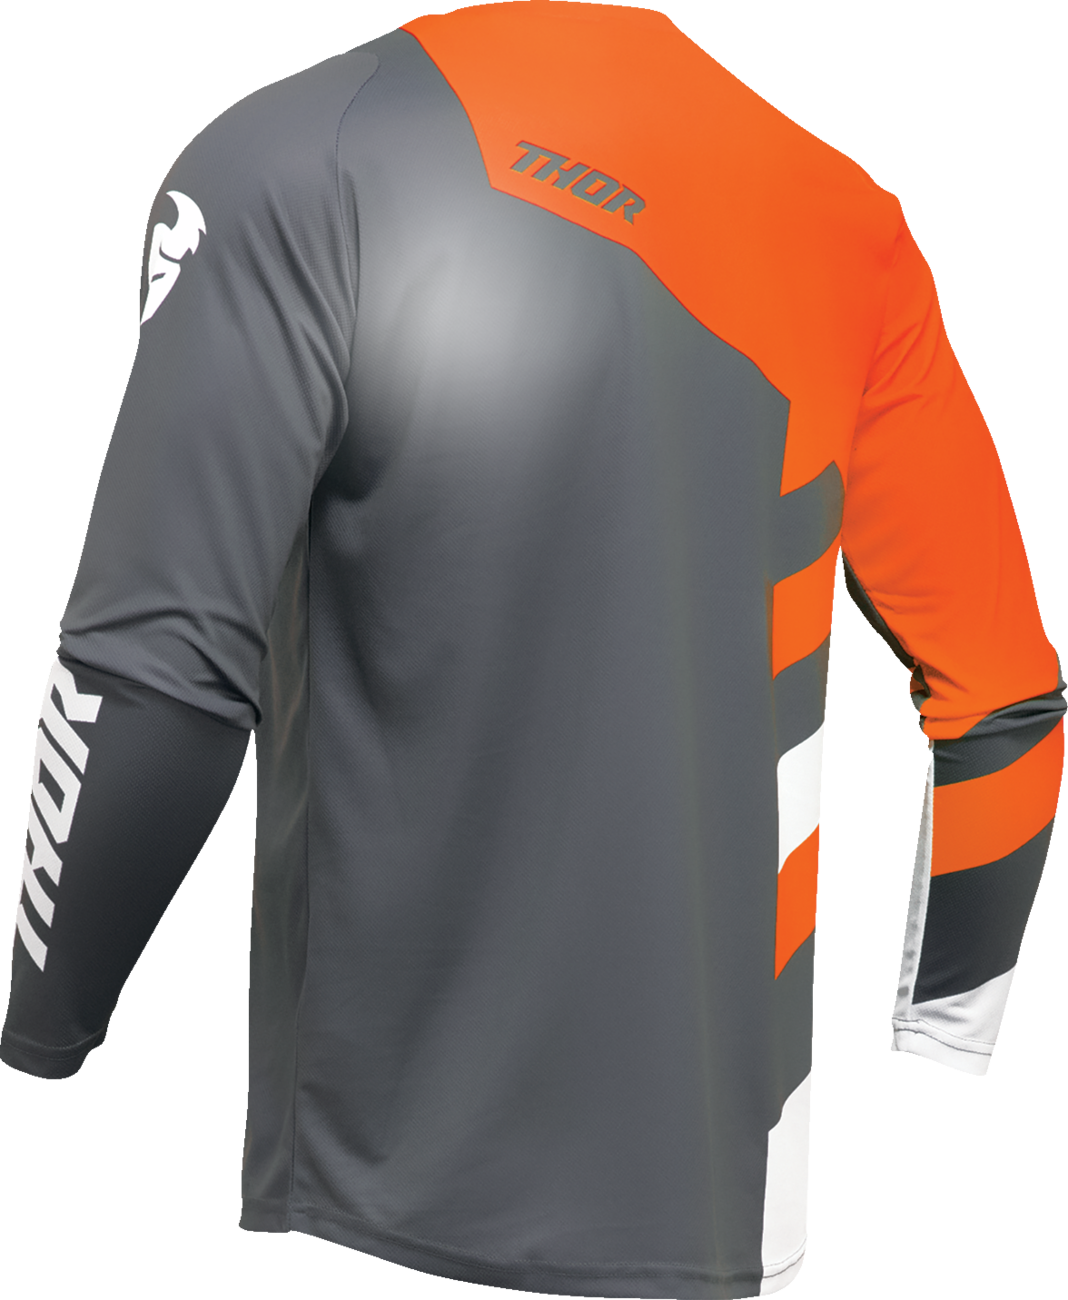 THOR Youth Sector Checker Jersey - Charcoal/Orange - Large 2912-2416